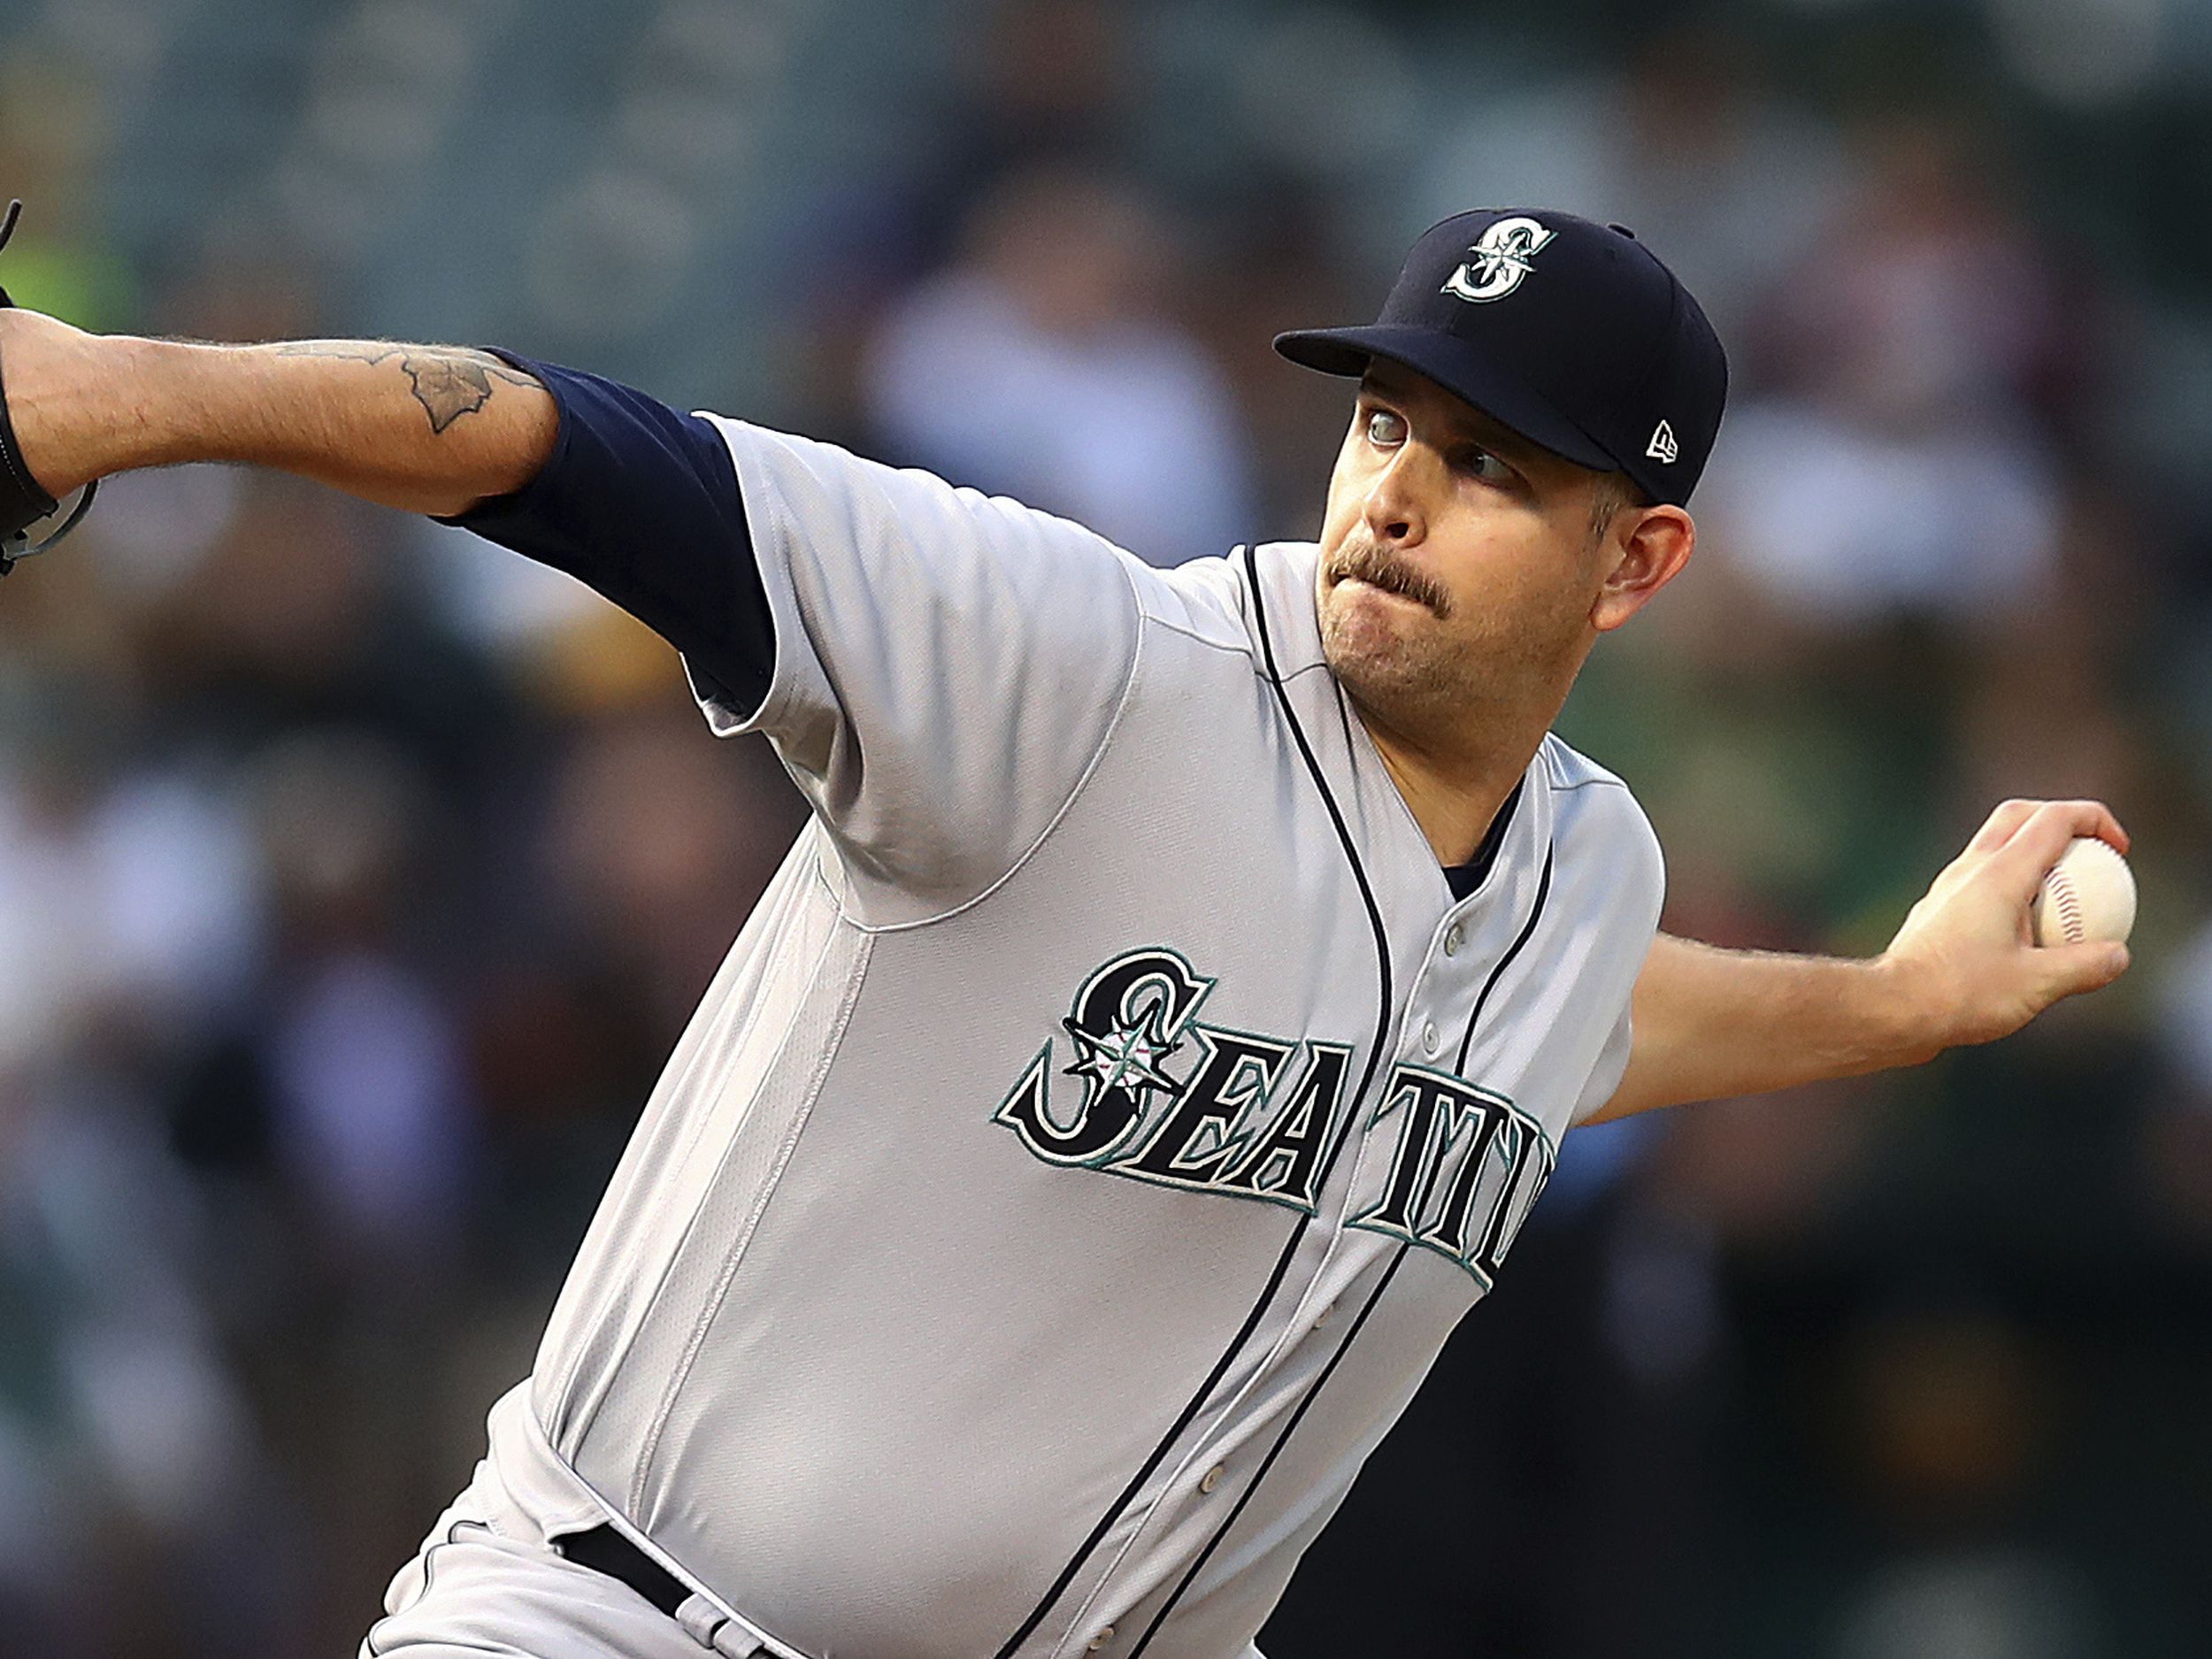 Healthy and excellent again, James Paxton savoring his chance to